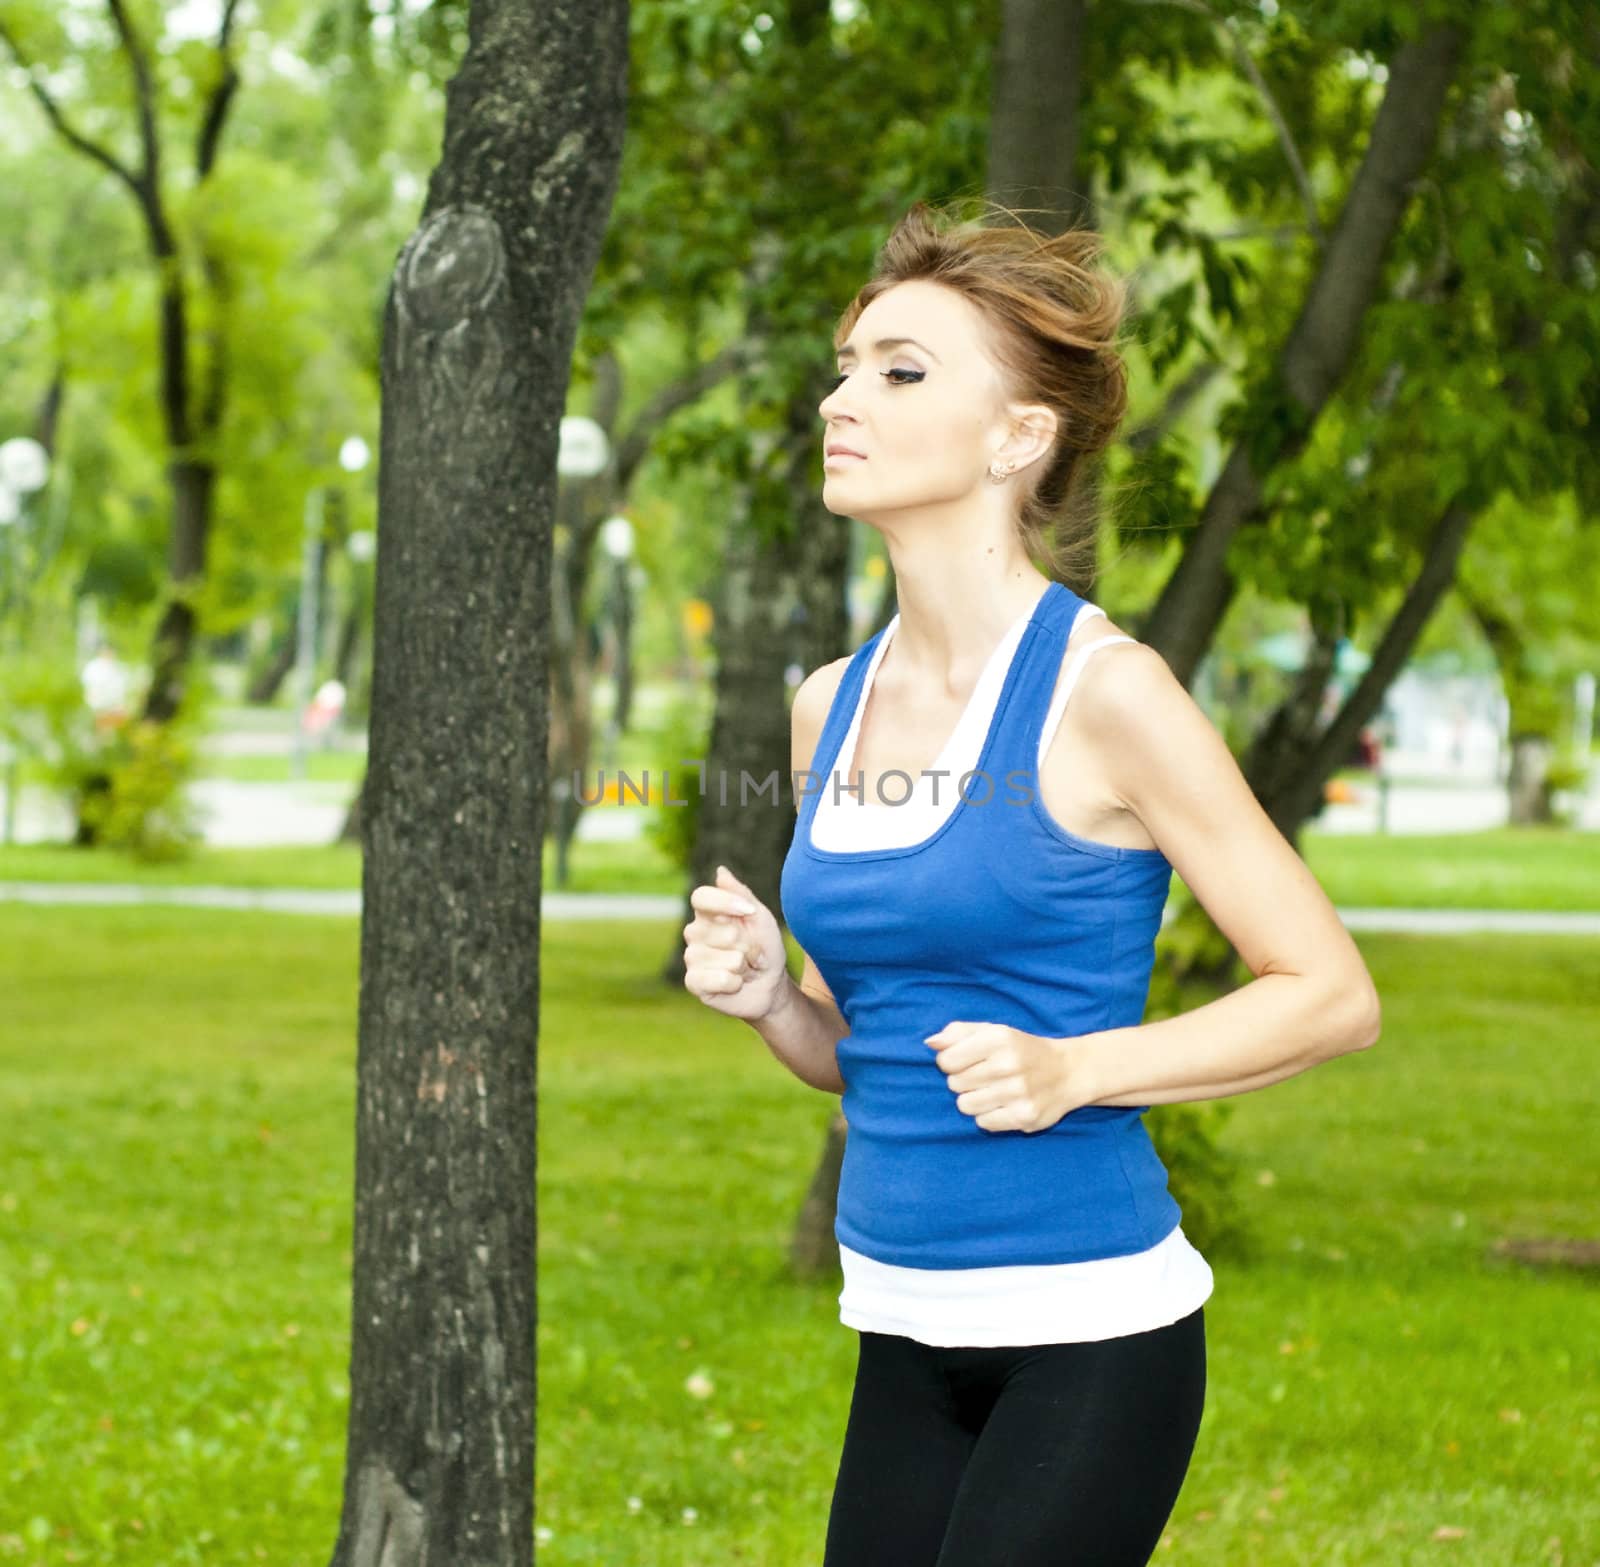 young woman jogging in the park in summer, trees and grass background